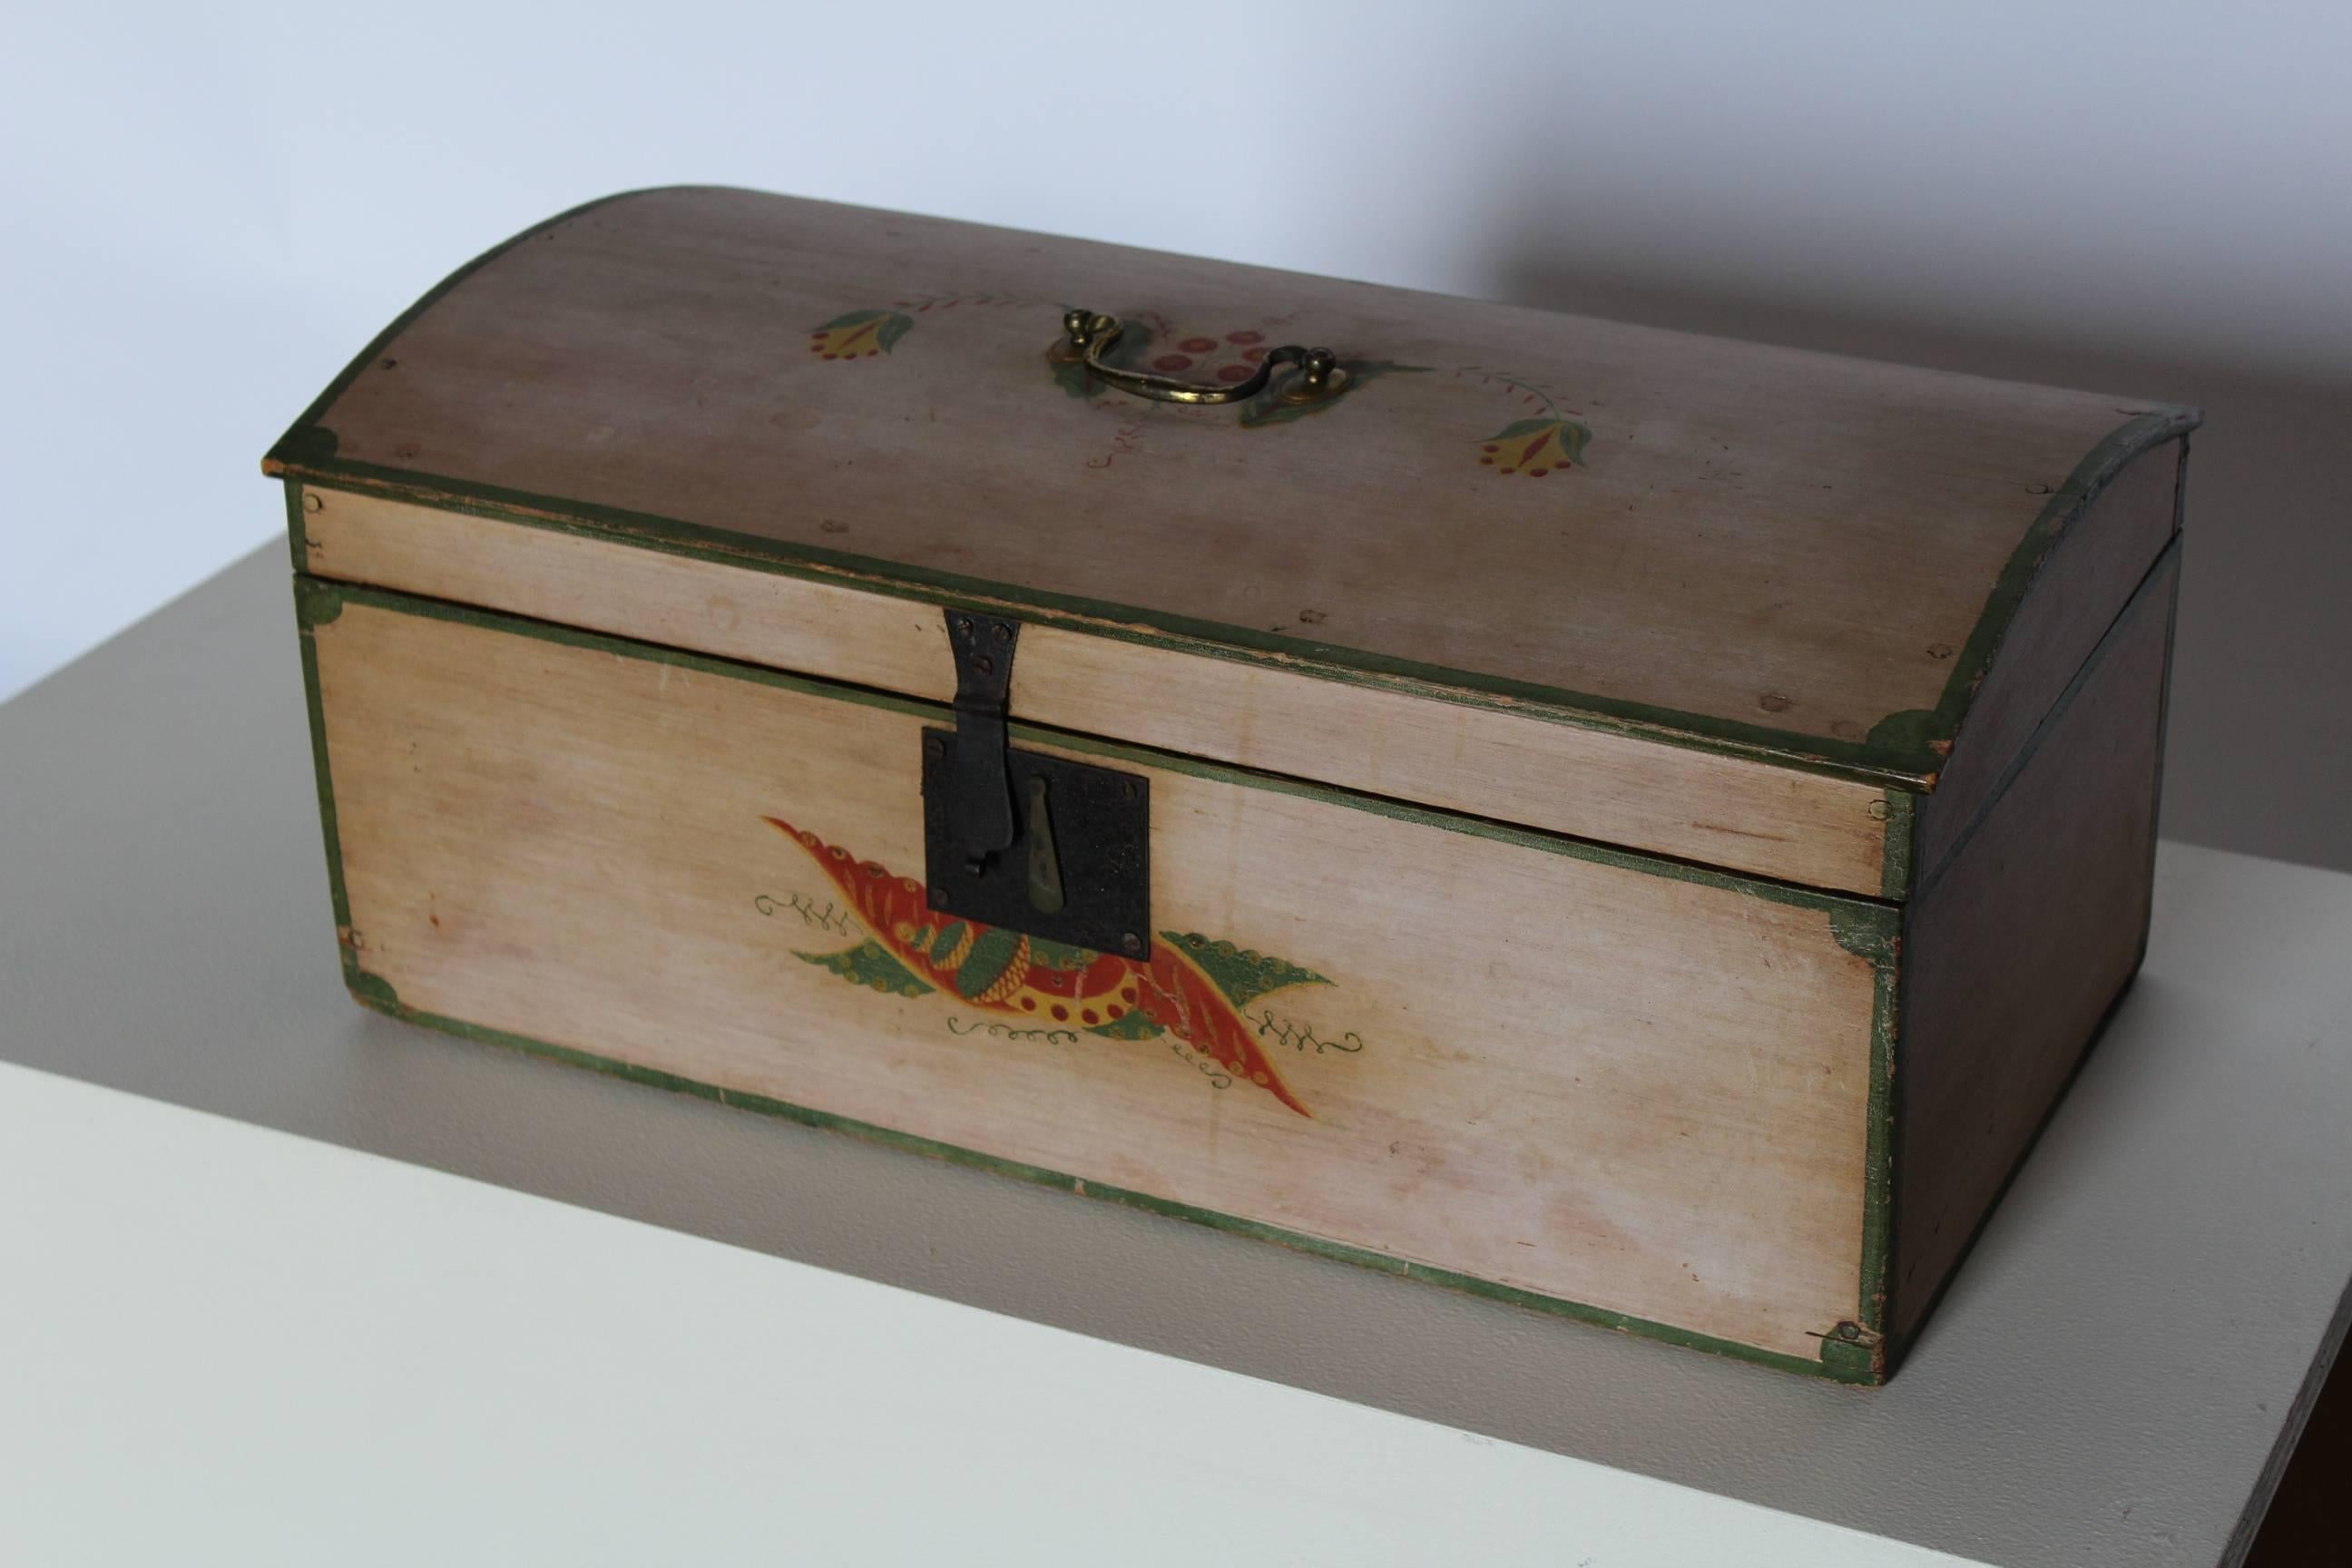 A dome-top box attributed to Daniel Stewart of Farmington, Maine, retaining the original fanciful decorated finish in red, green and yellow on a salmon ground. This charming dome-top box is a wonderful example of American Folk Art painted